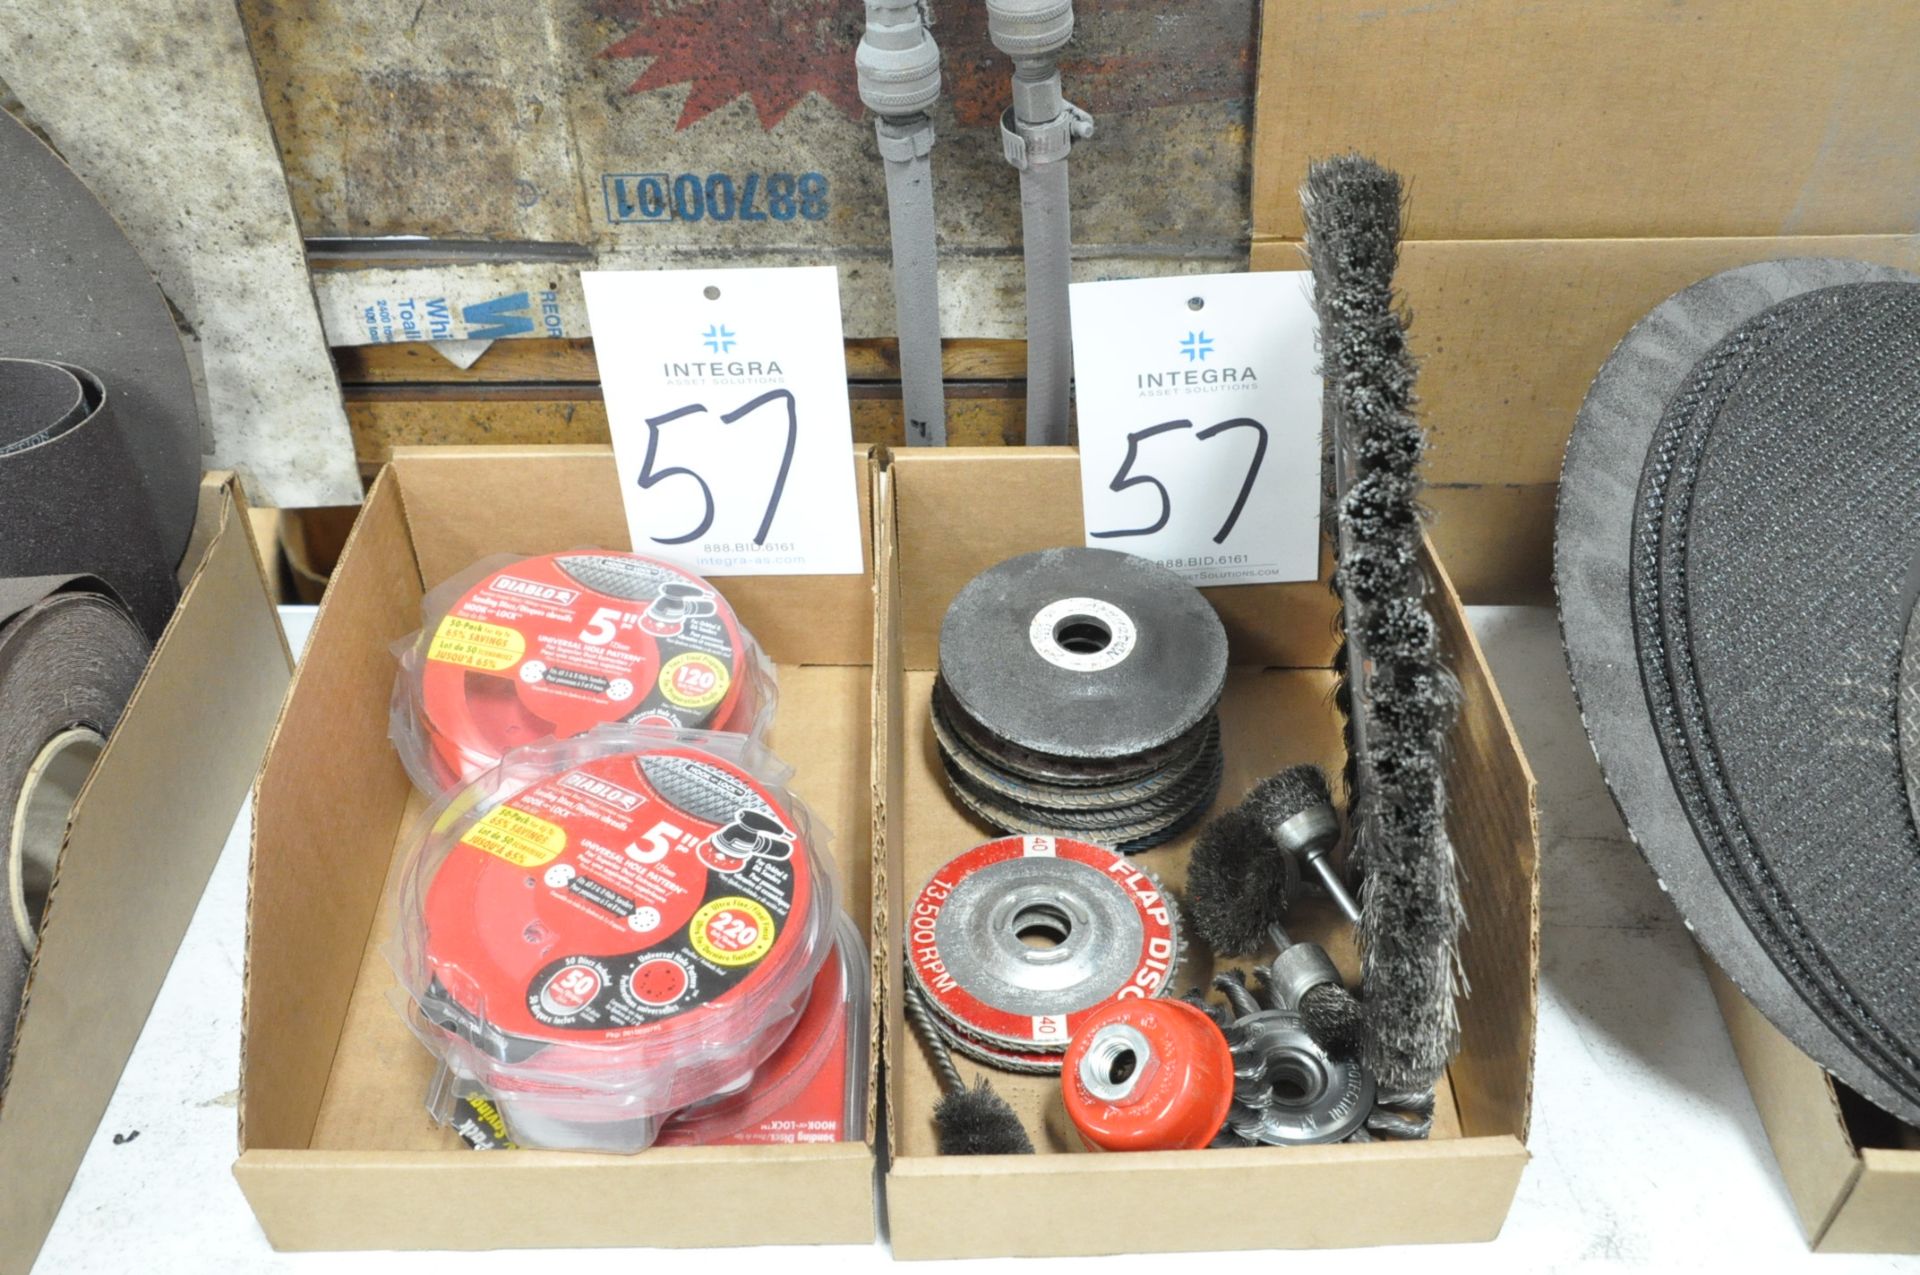 Lot-Diablo 5" Sanding Disks, Grinding Disks and Wire Wheels in (2) Boxes